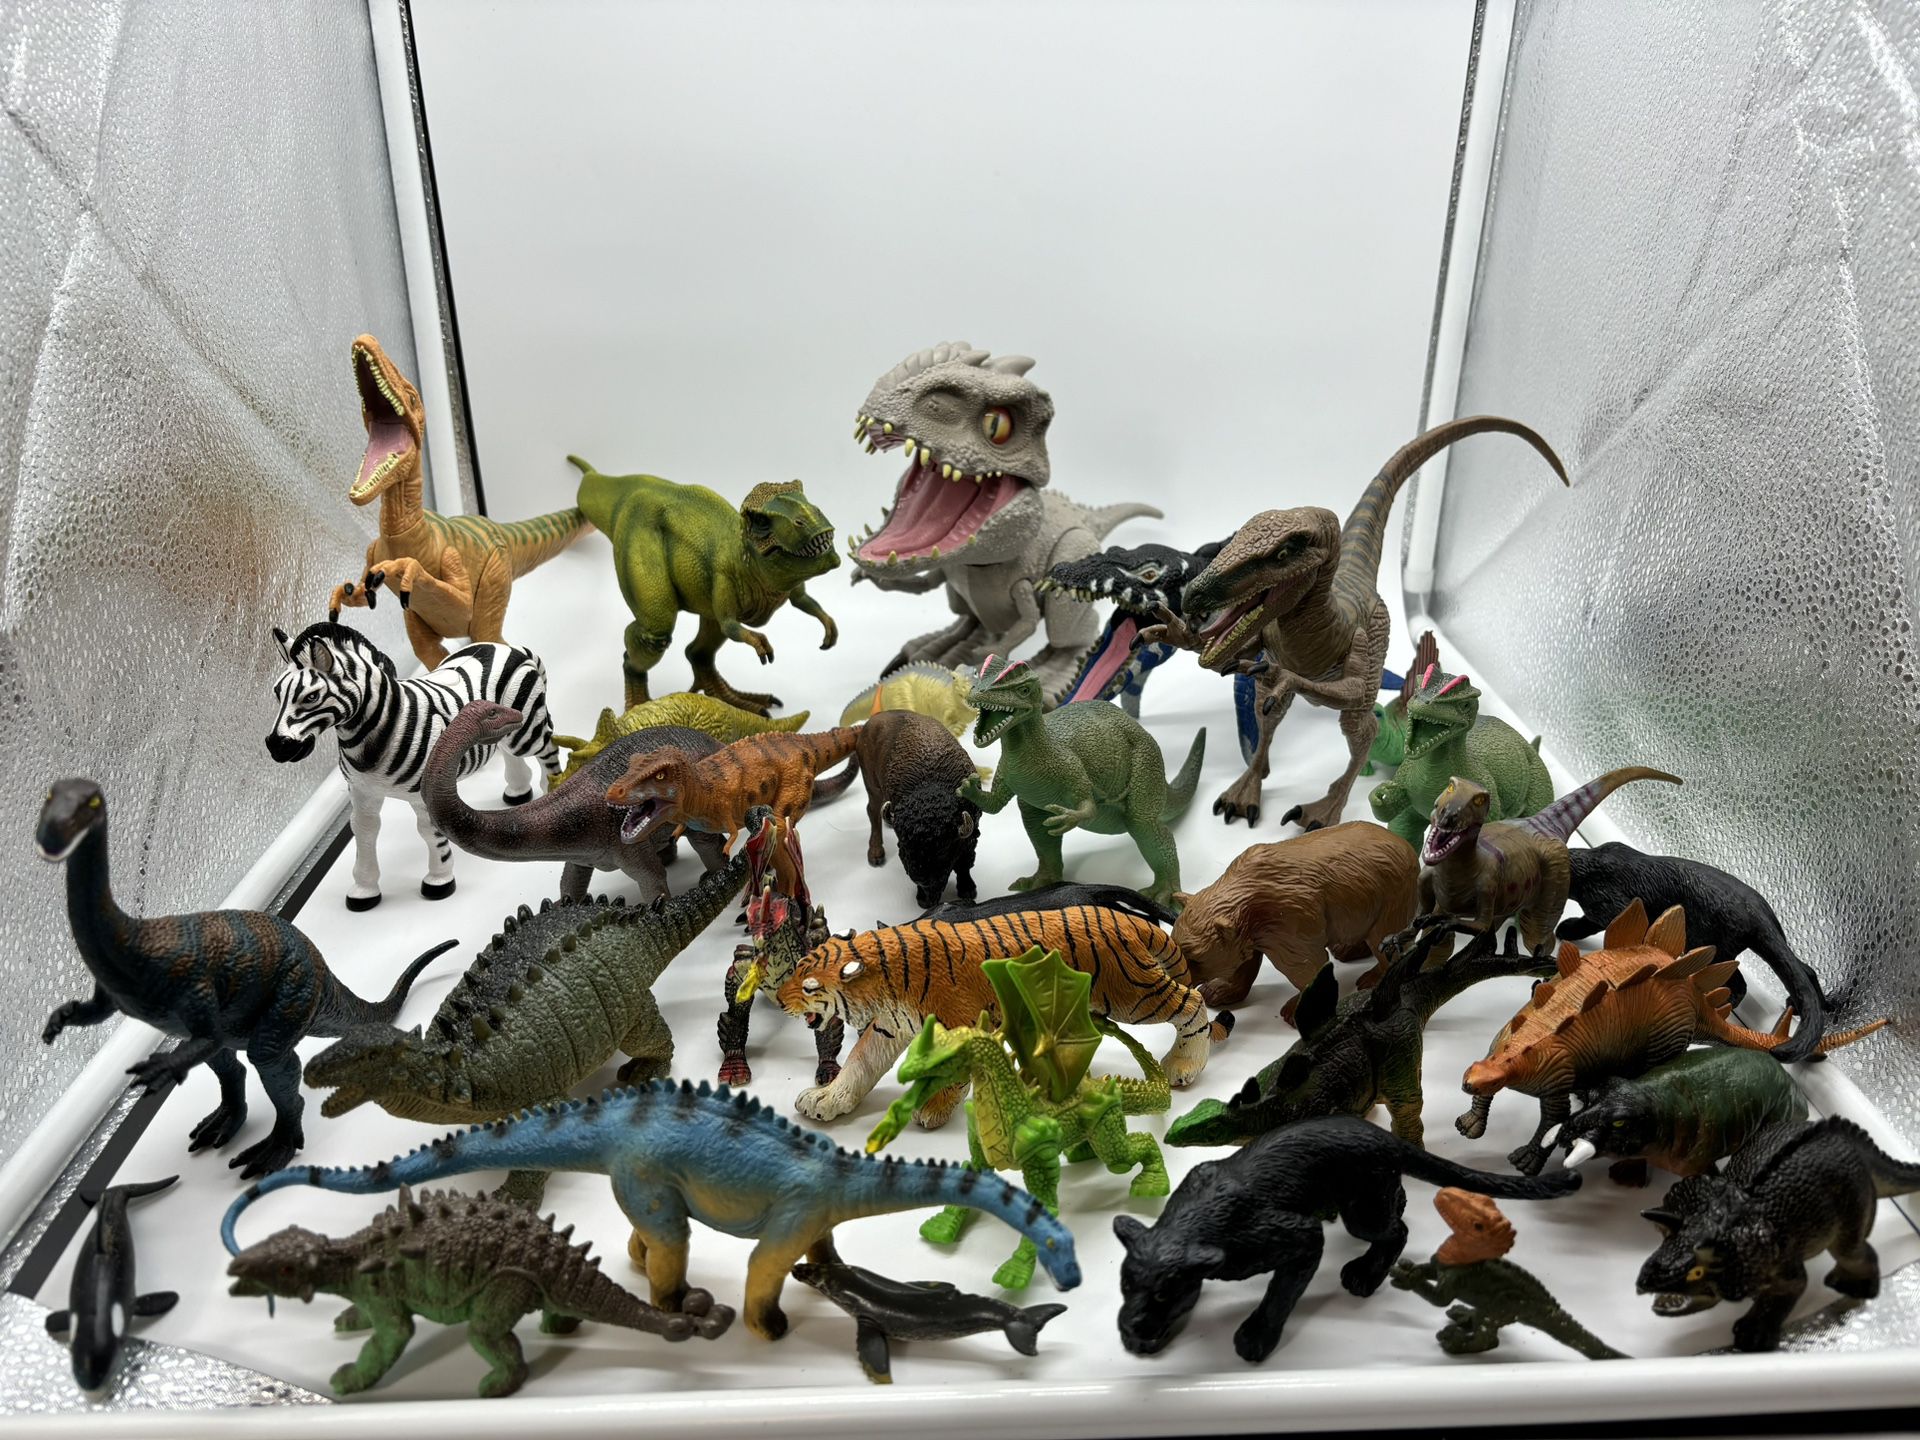 Kids Dinosaur & Assorted Animal Lot Of 40- Jurassic World, Chap Mei & More! Great Value